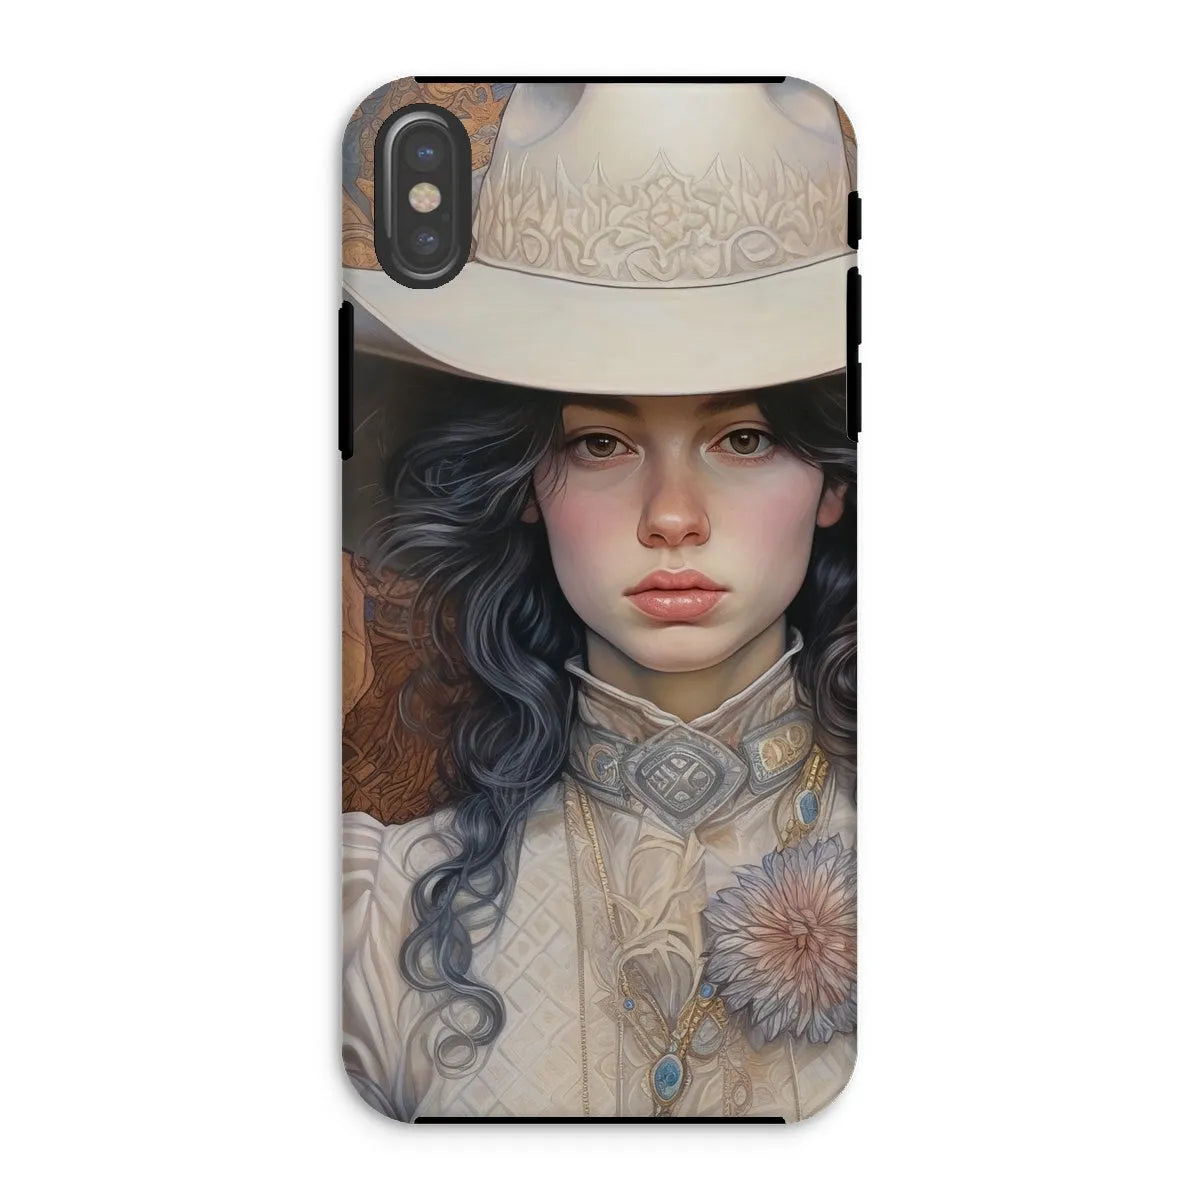 Helena The Lesbian Cowgirl - Sapphic Art Phone Case - Iphone Xs / Matte - Mobile Phone Cases - Aesthetic Art